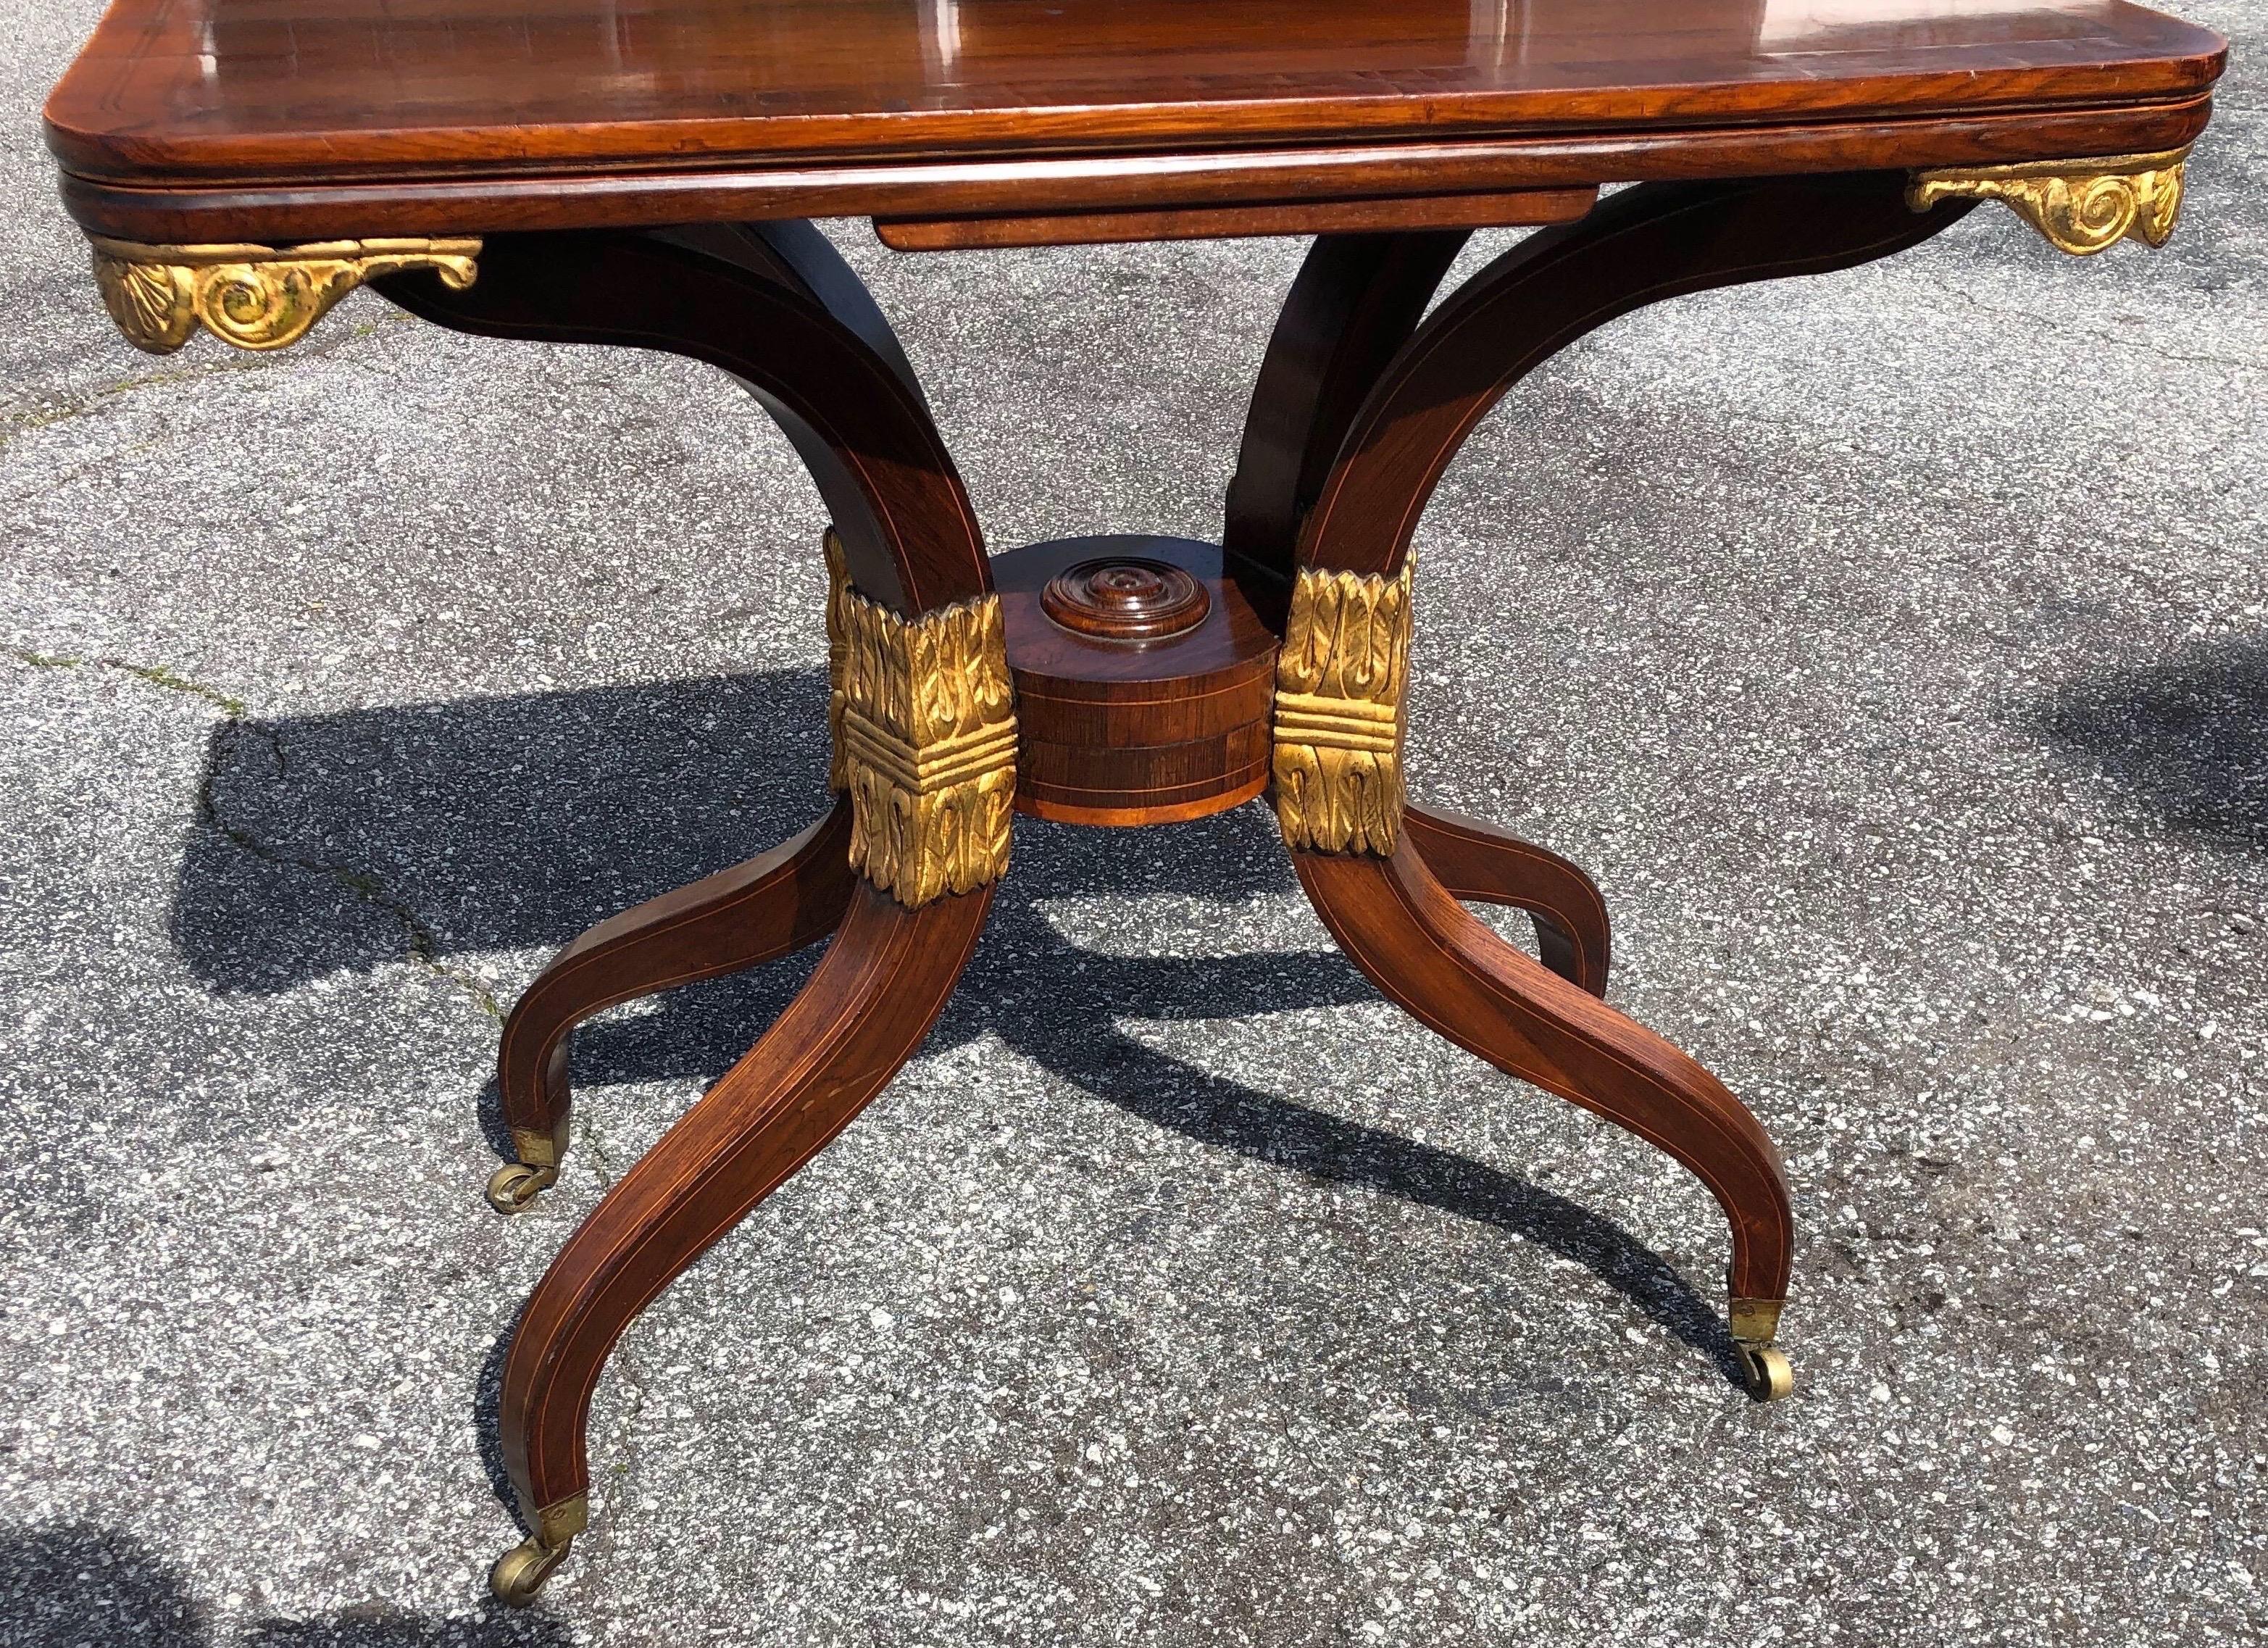 English Rare 19th Century Regency Rosewood & Parcel Gilt Card Table Possibly G. Bullock